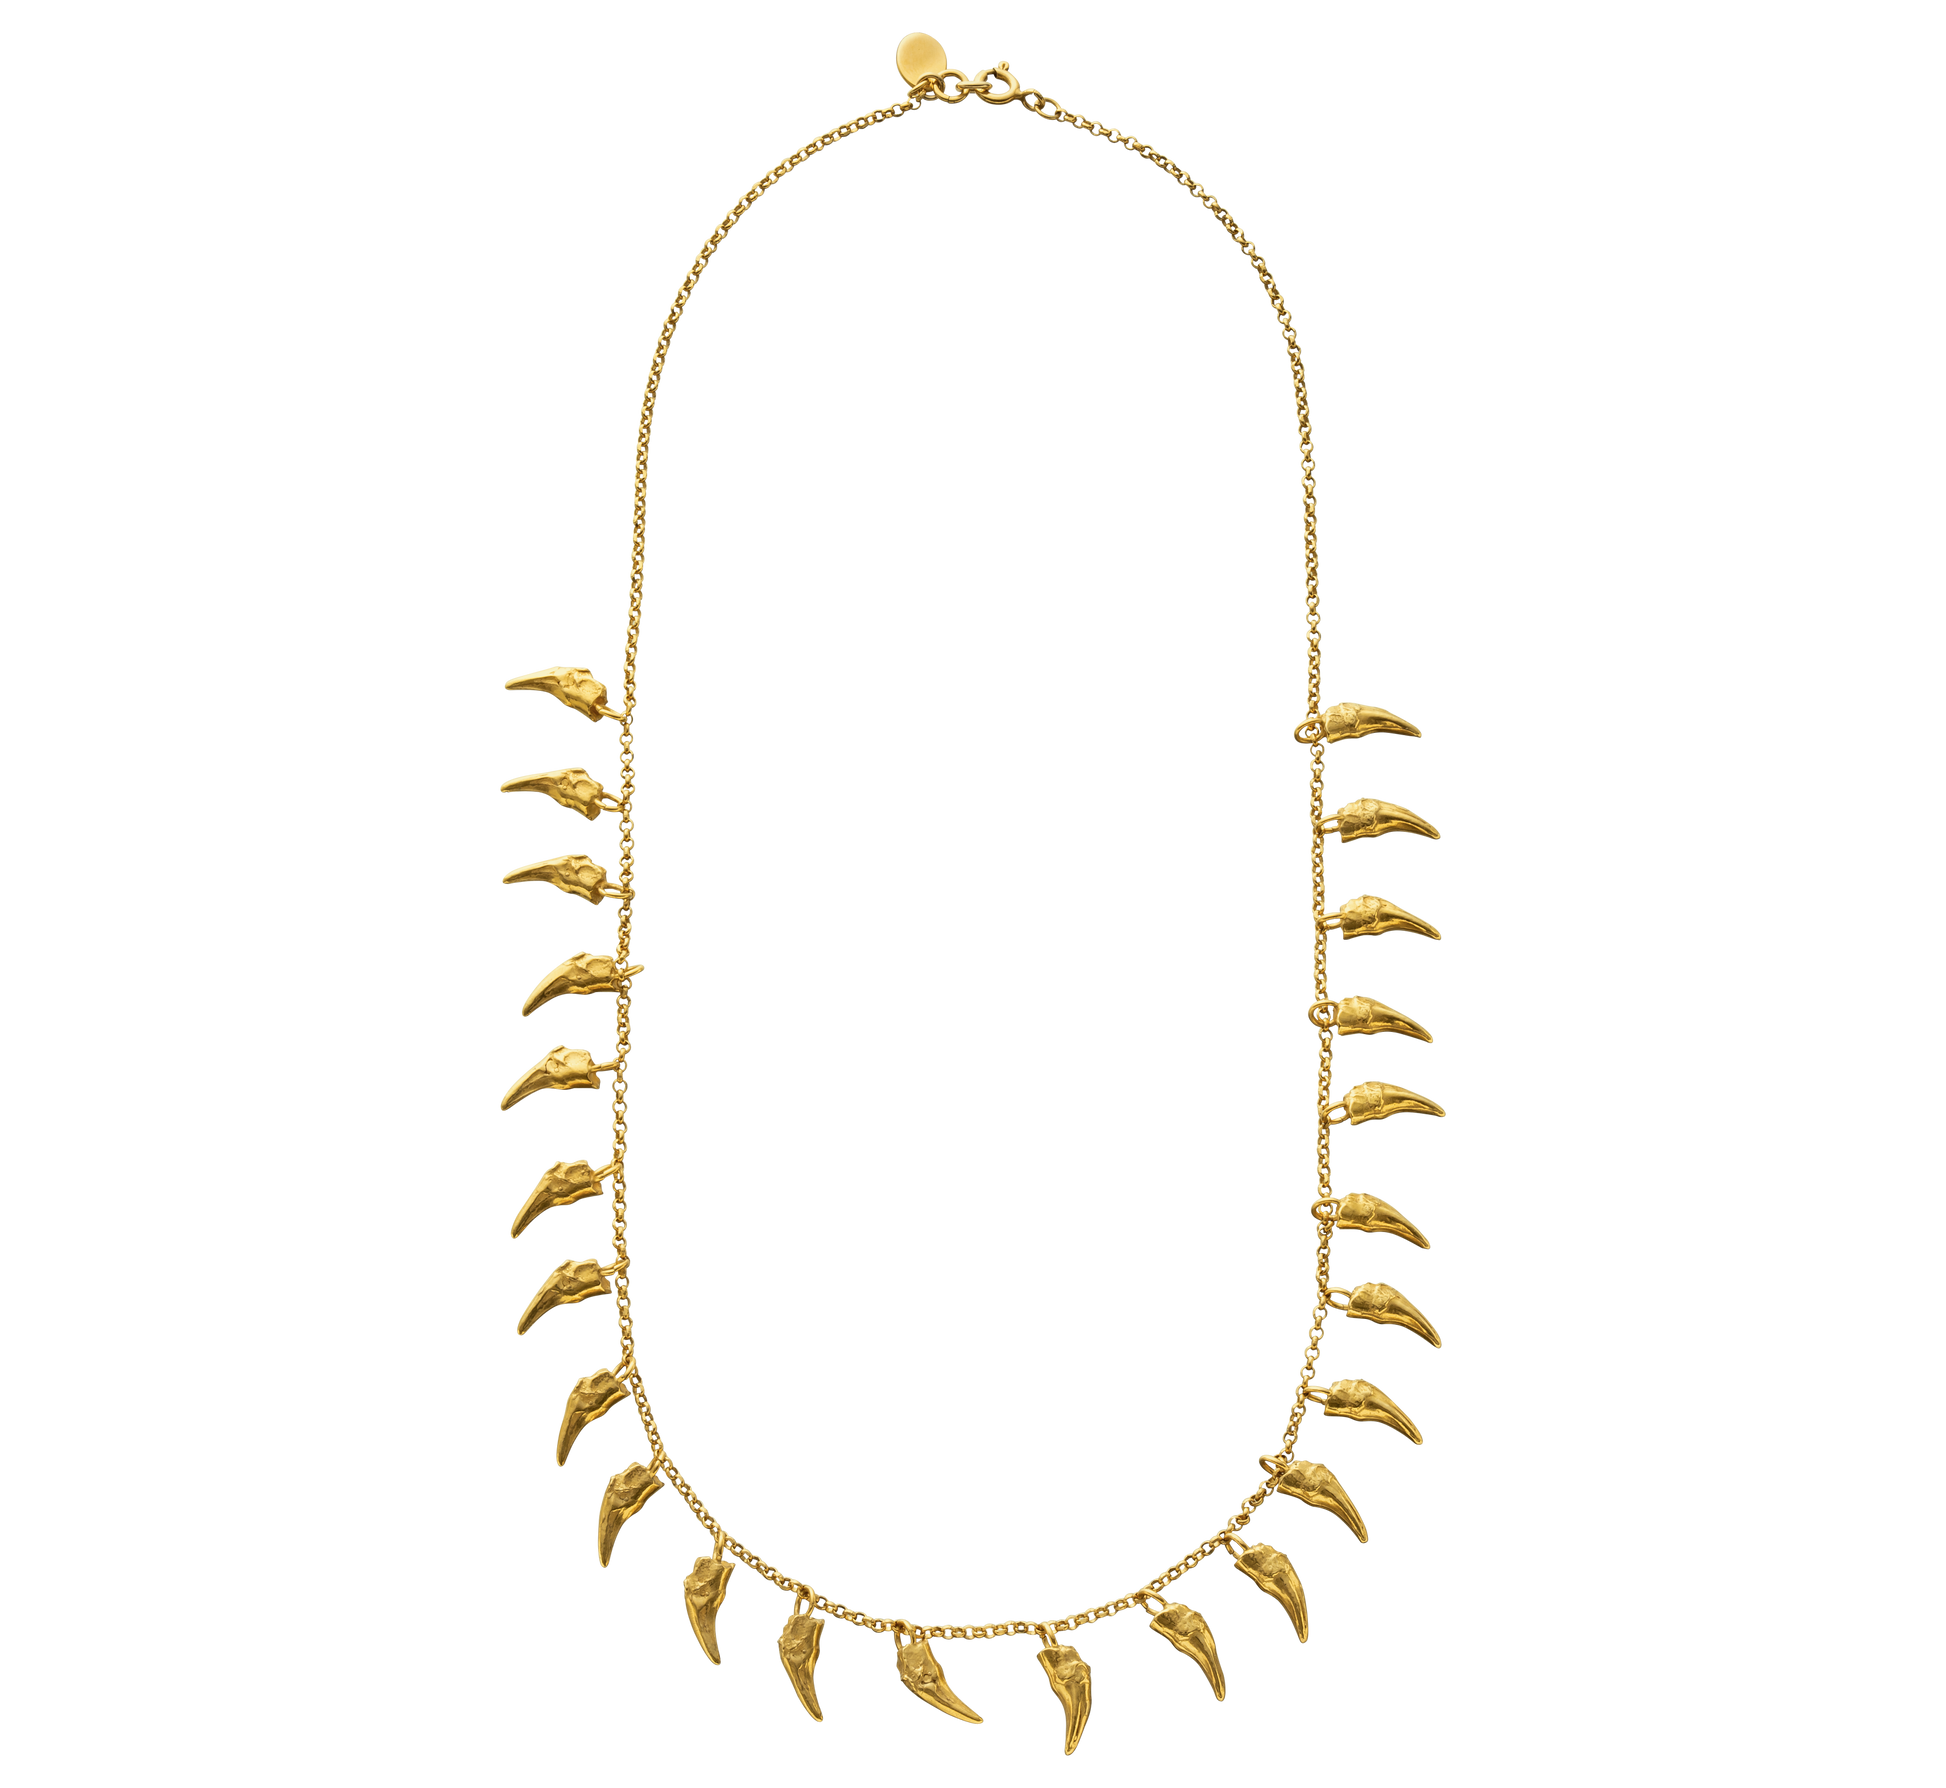 A delicate gold vermeil necklace cast from the teeth of a cat. The necklace is on a rolo-link chain. Made by Violette Stehli using the lost wax casting technique.